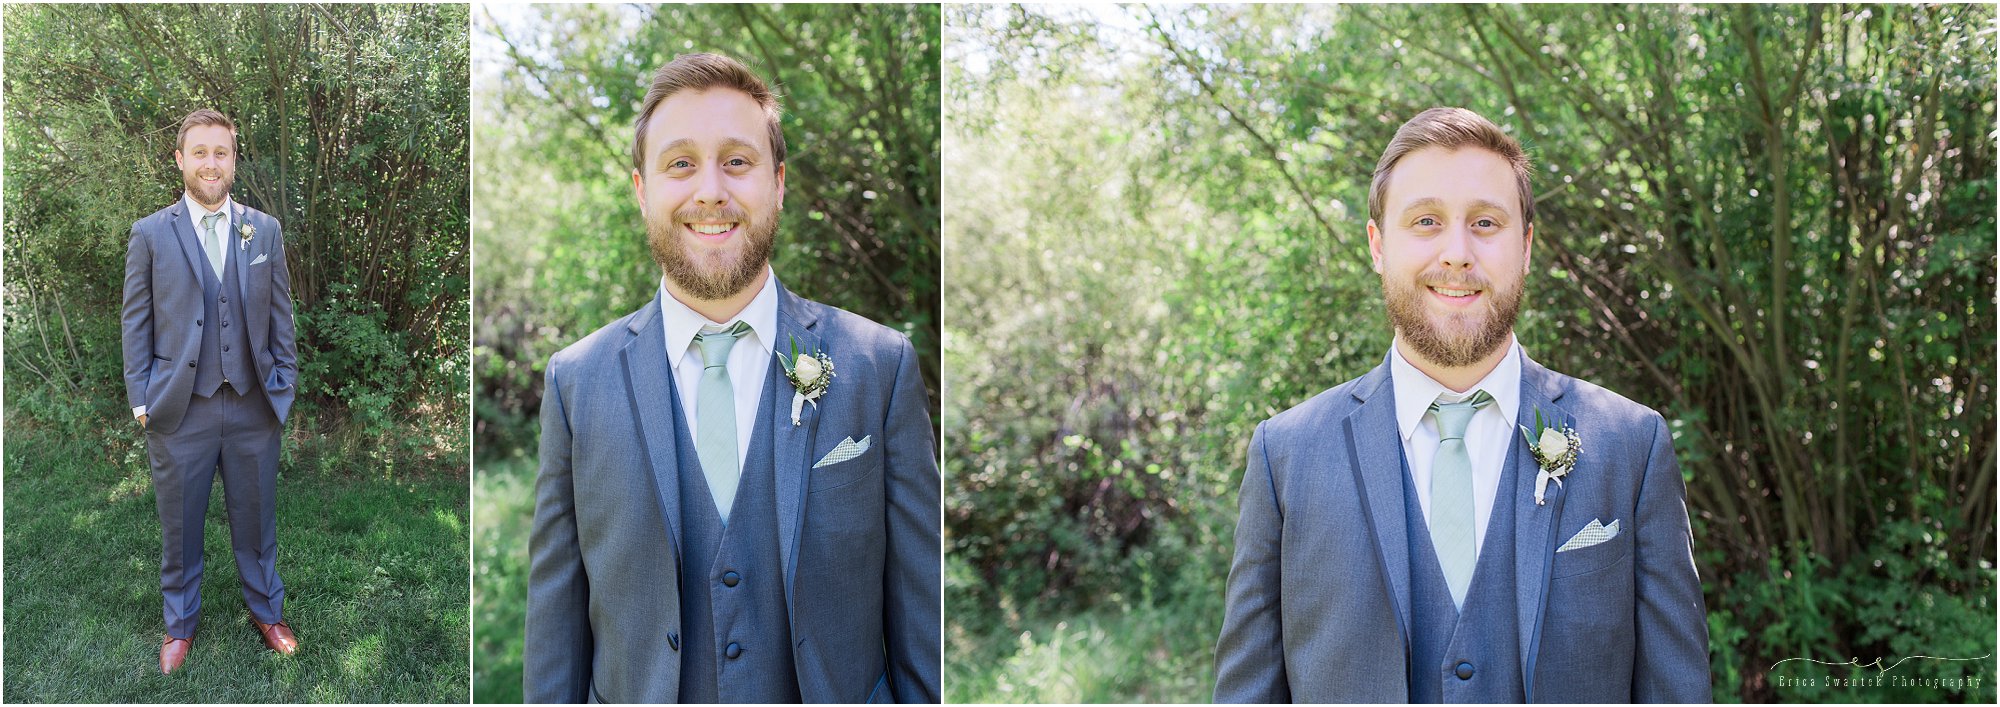 A dapper groom poses for formal portraits at Aspen Hall in Bend, OR. | Erica Swantek Photography